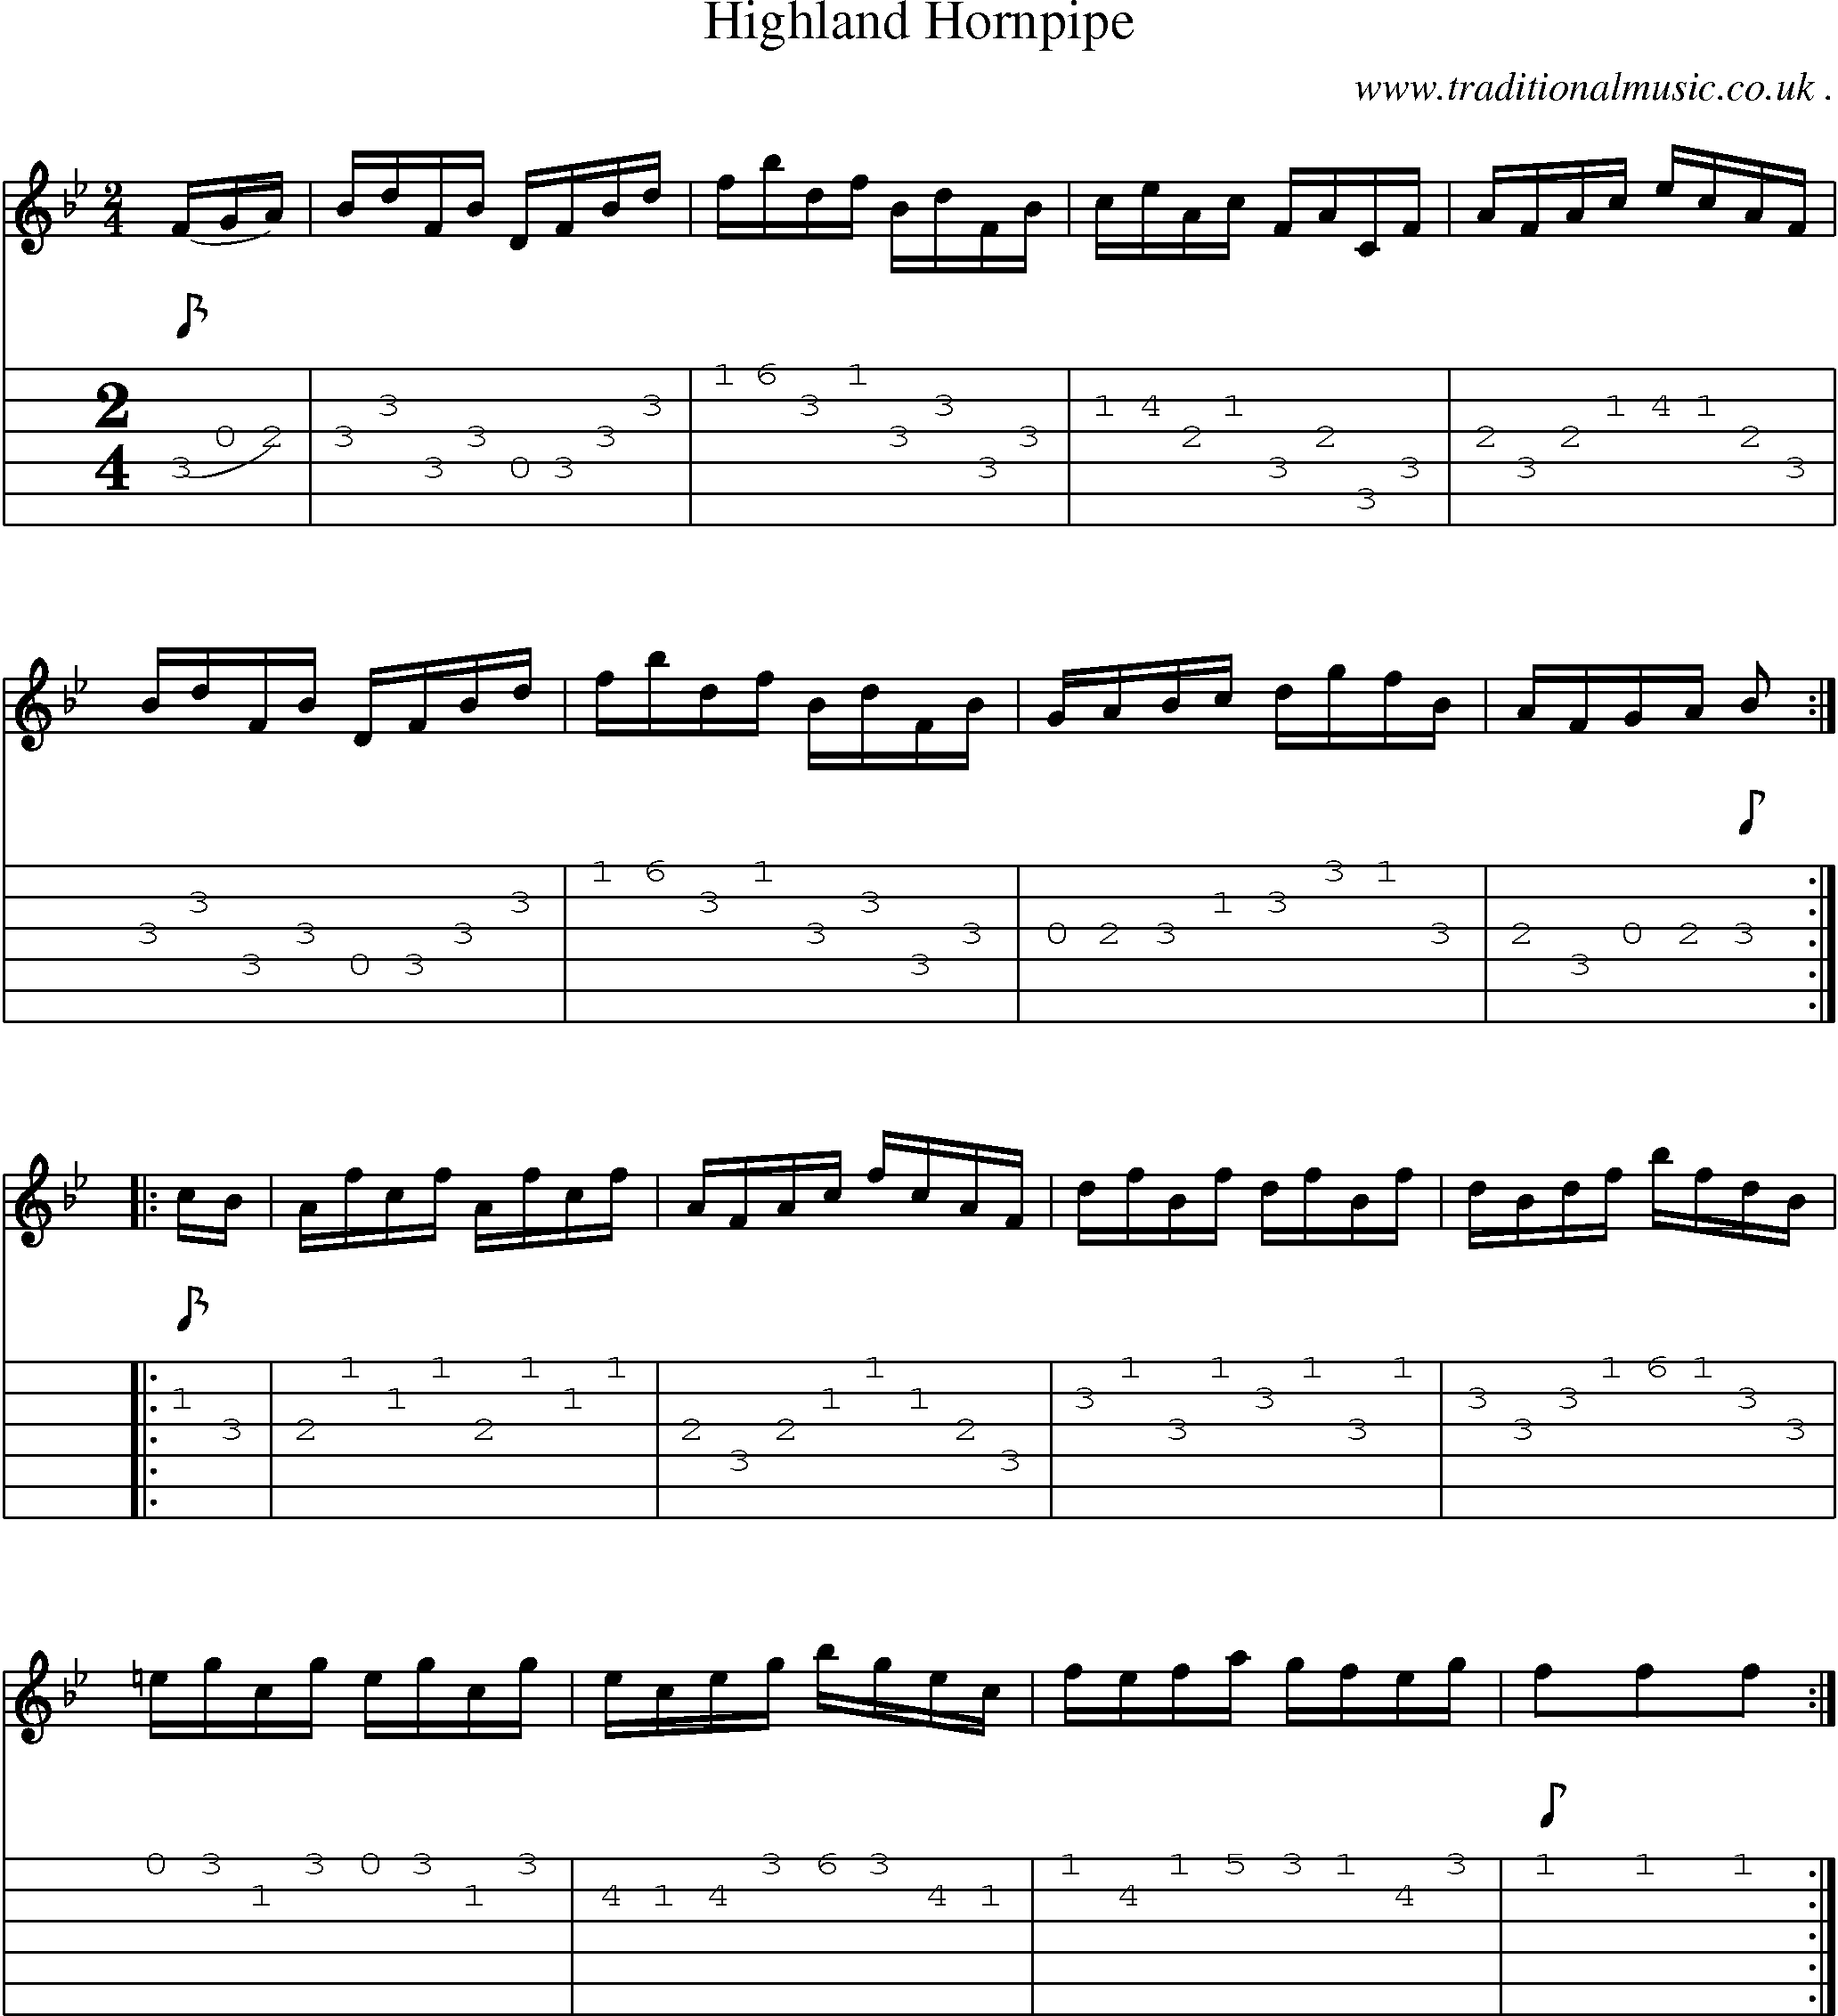 Sheet-Music and Guitar Tabs for Highland Hornpipe